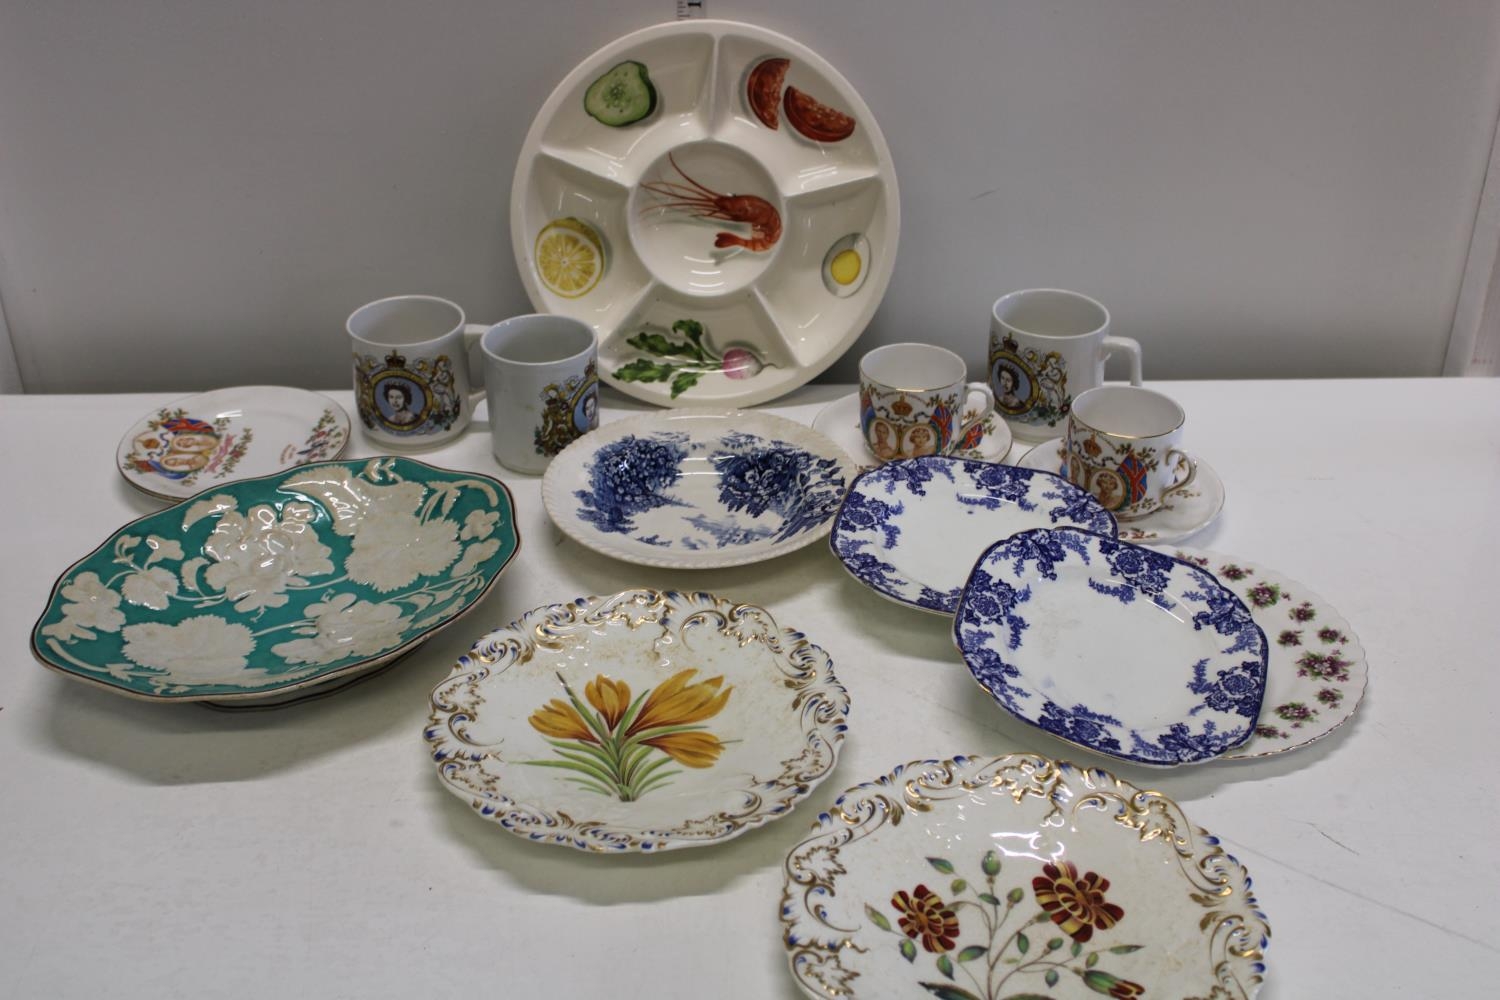 Selection of ceramics. Plates, cups and other